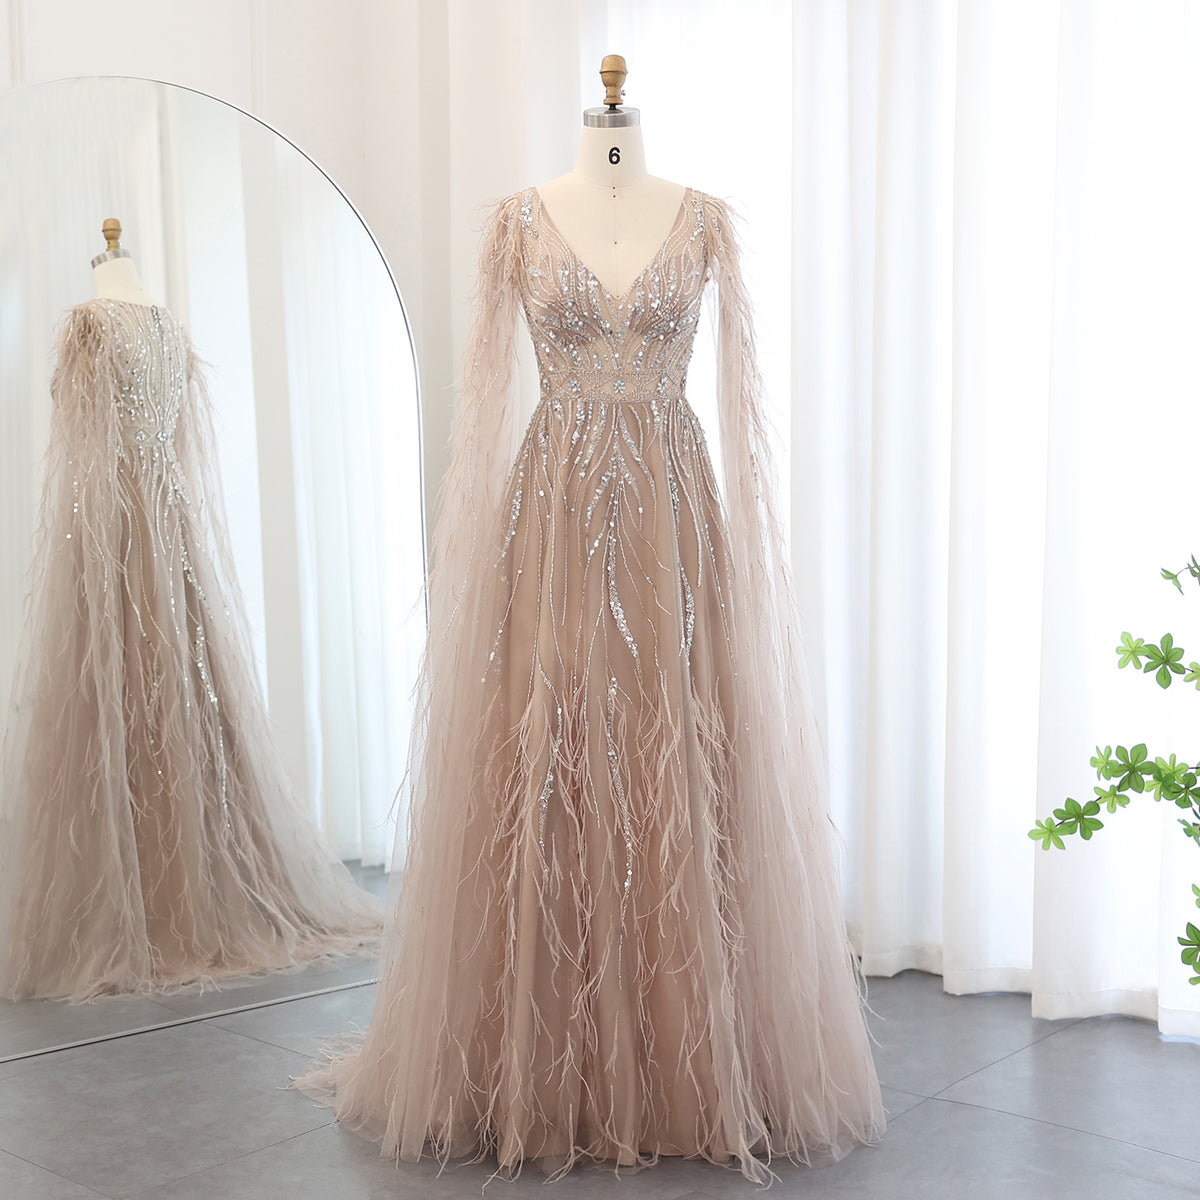 Sharon Said Luxury Feathers Nude A-line Evening Dresses with Cape Sleeves V-Neck Lilac Arabic Women Wedding Party Dress SS186